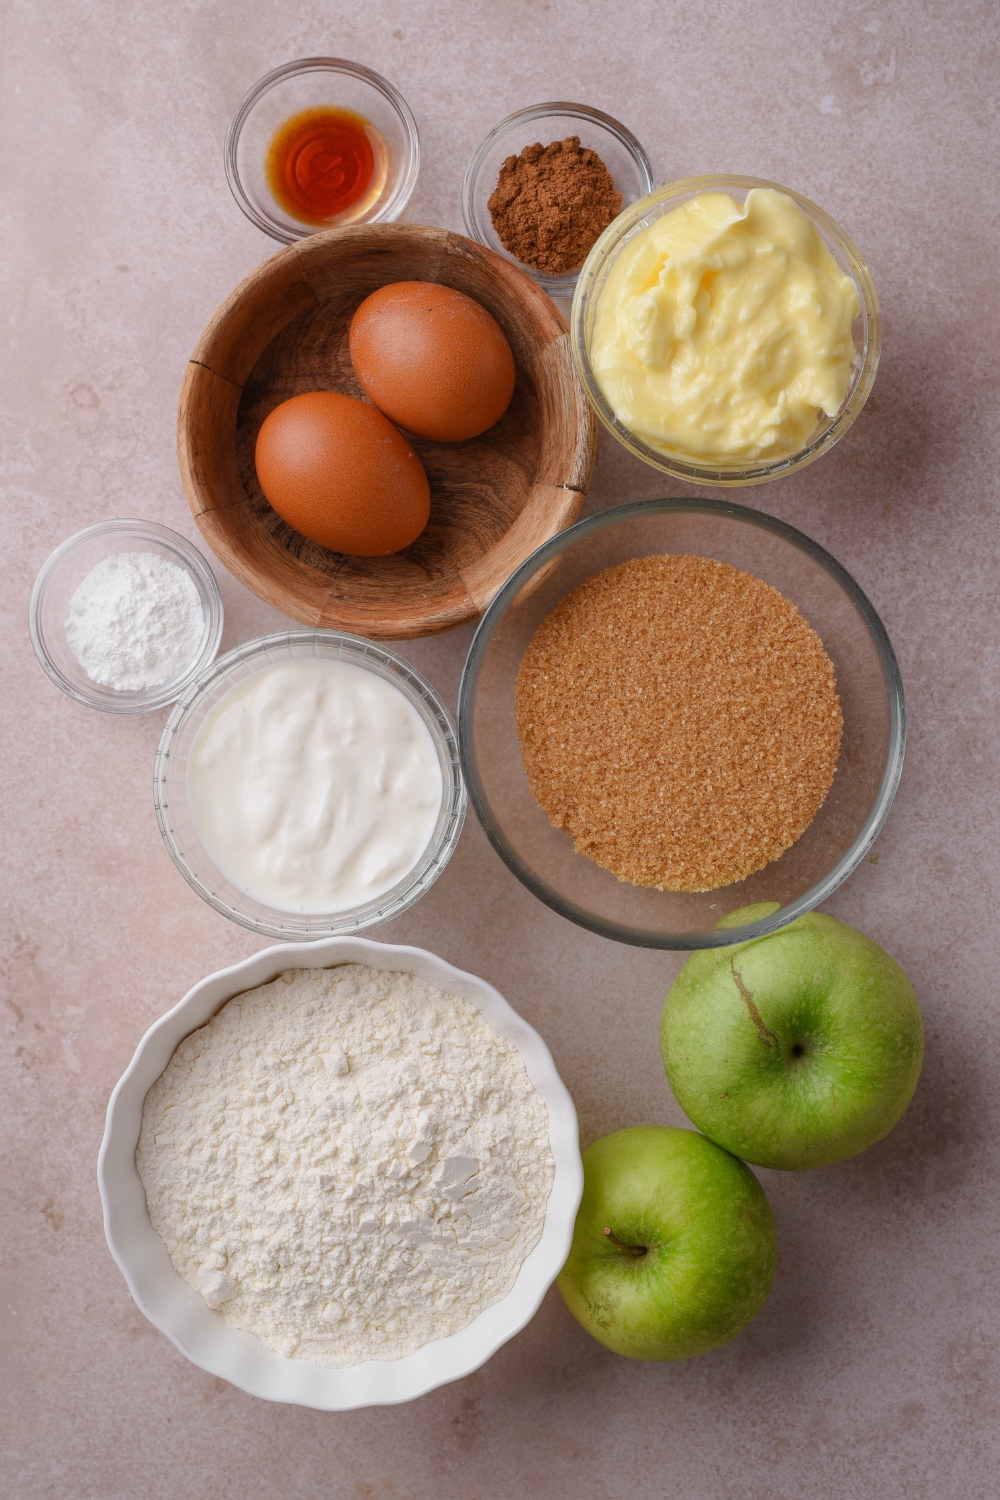 A countertop with various bowls containing butter, eggs, vanilla, apple pie spice, brown sugar, sour cream, baking powder, flour, and apples.